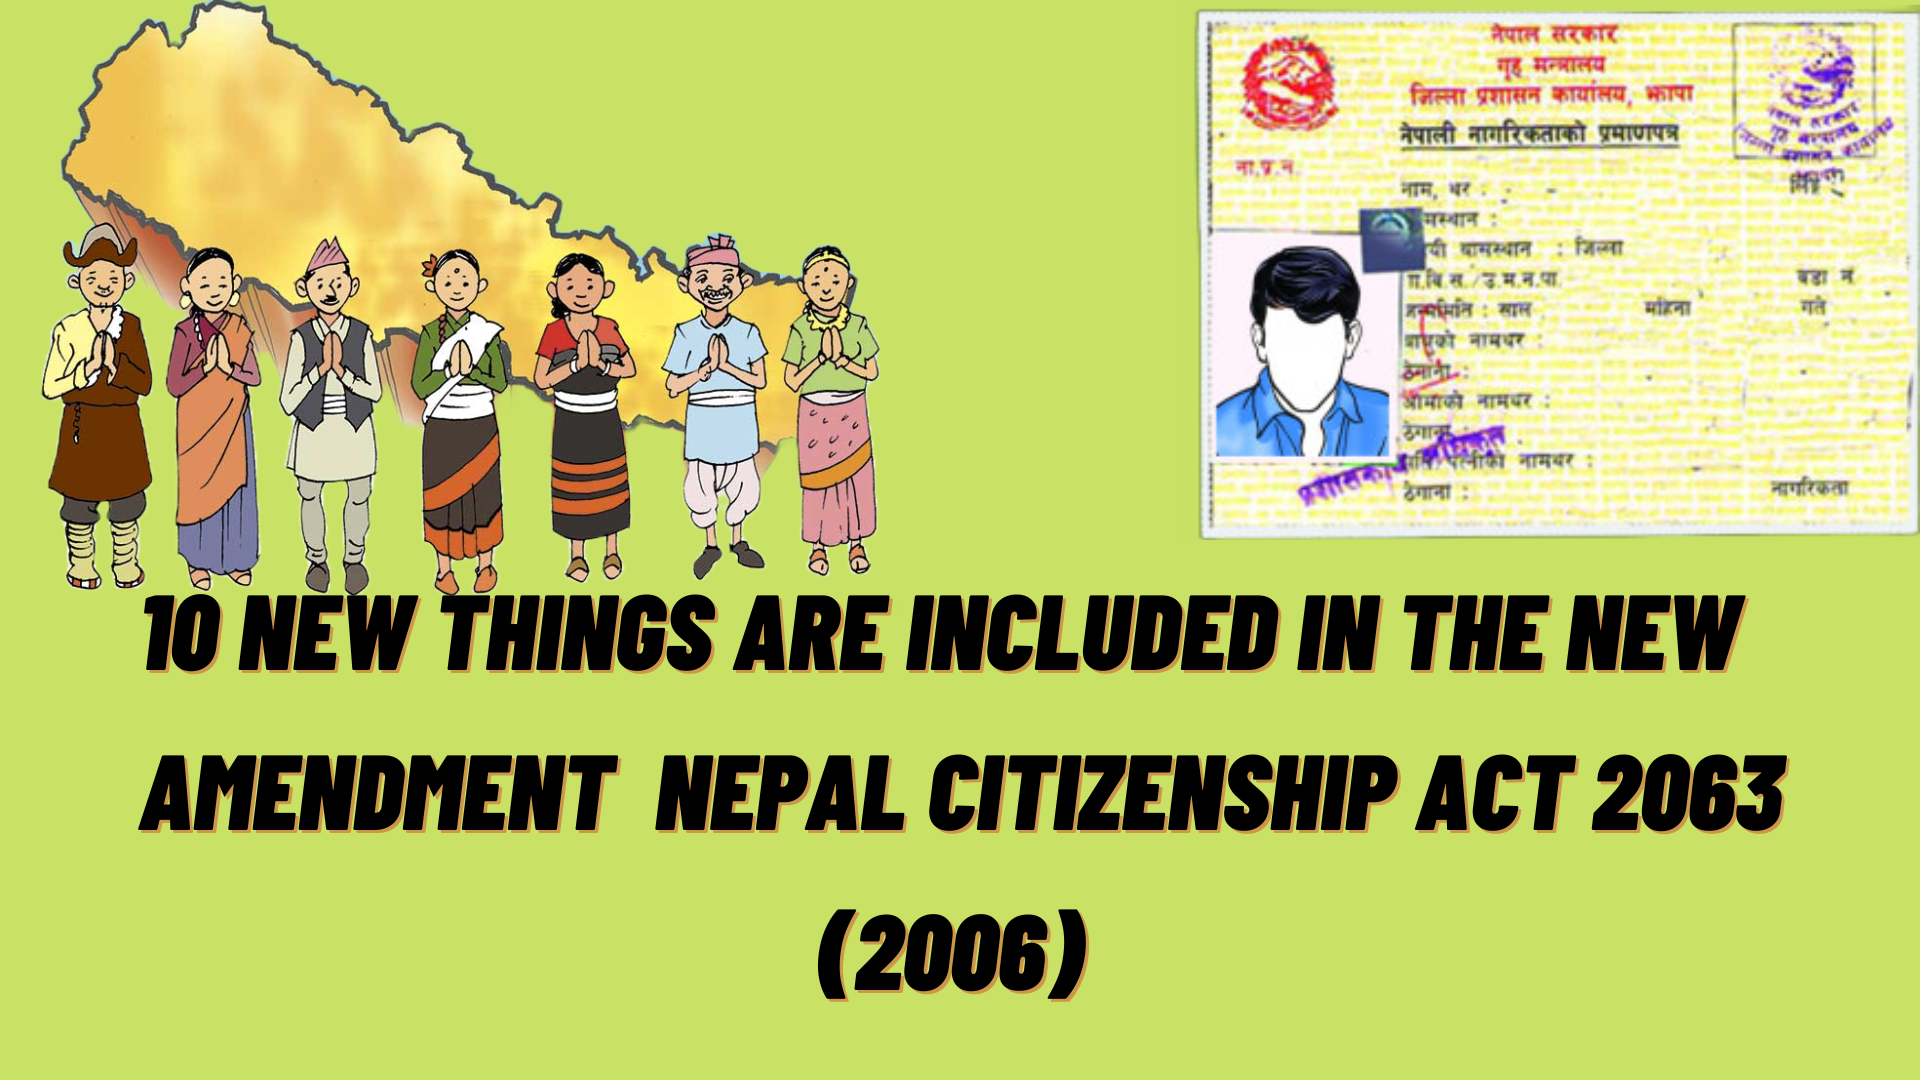 10-new-thing-included-on-radical-amendtment-on-nepal-citizenship-act-2063